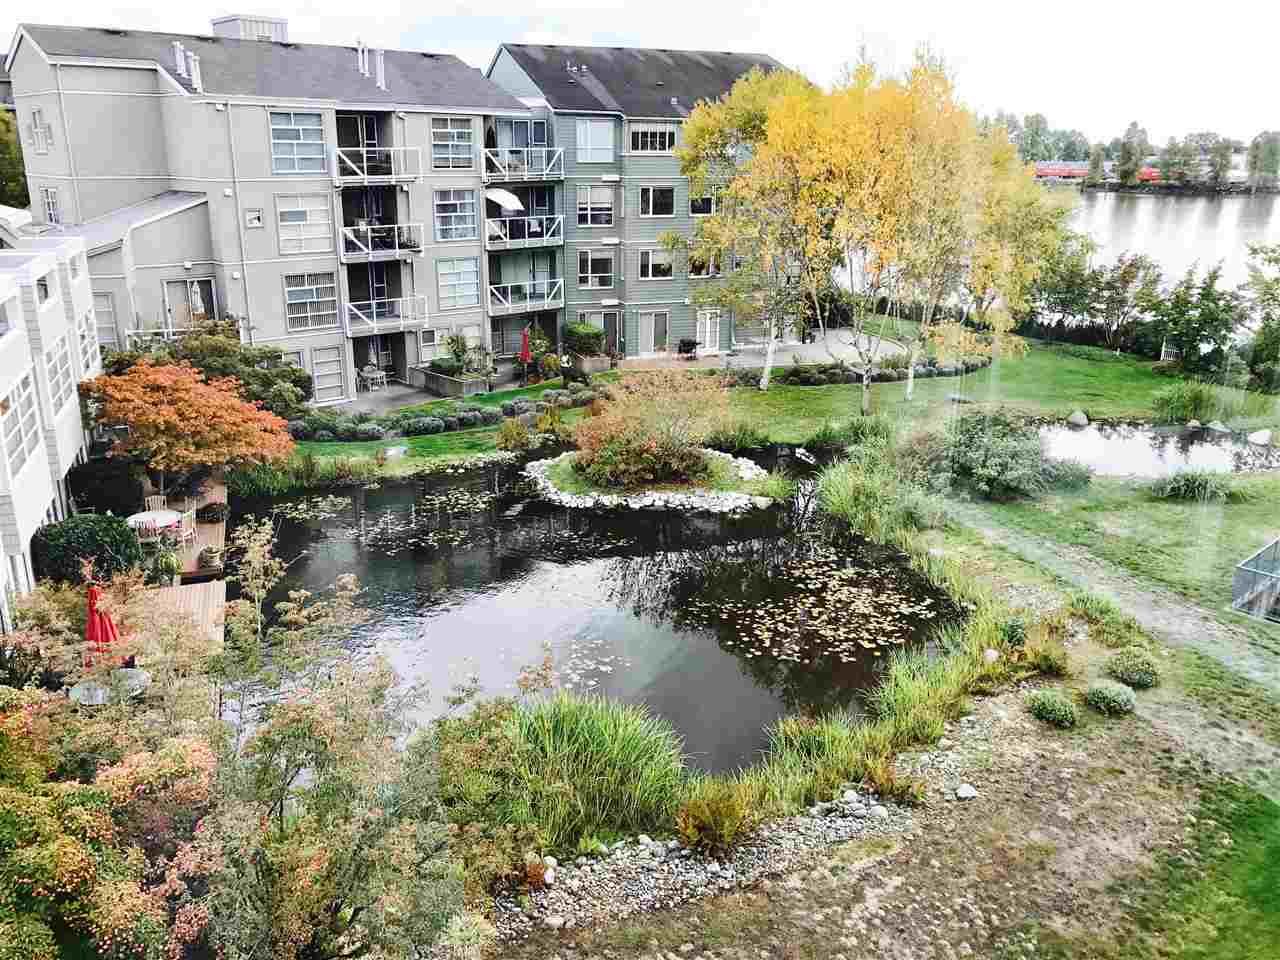 Main Photo: 415 2020 SE KENT AVENUE in : South Marine Condo for sale (Vancouver East)  : MLS®# R2120845